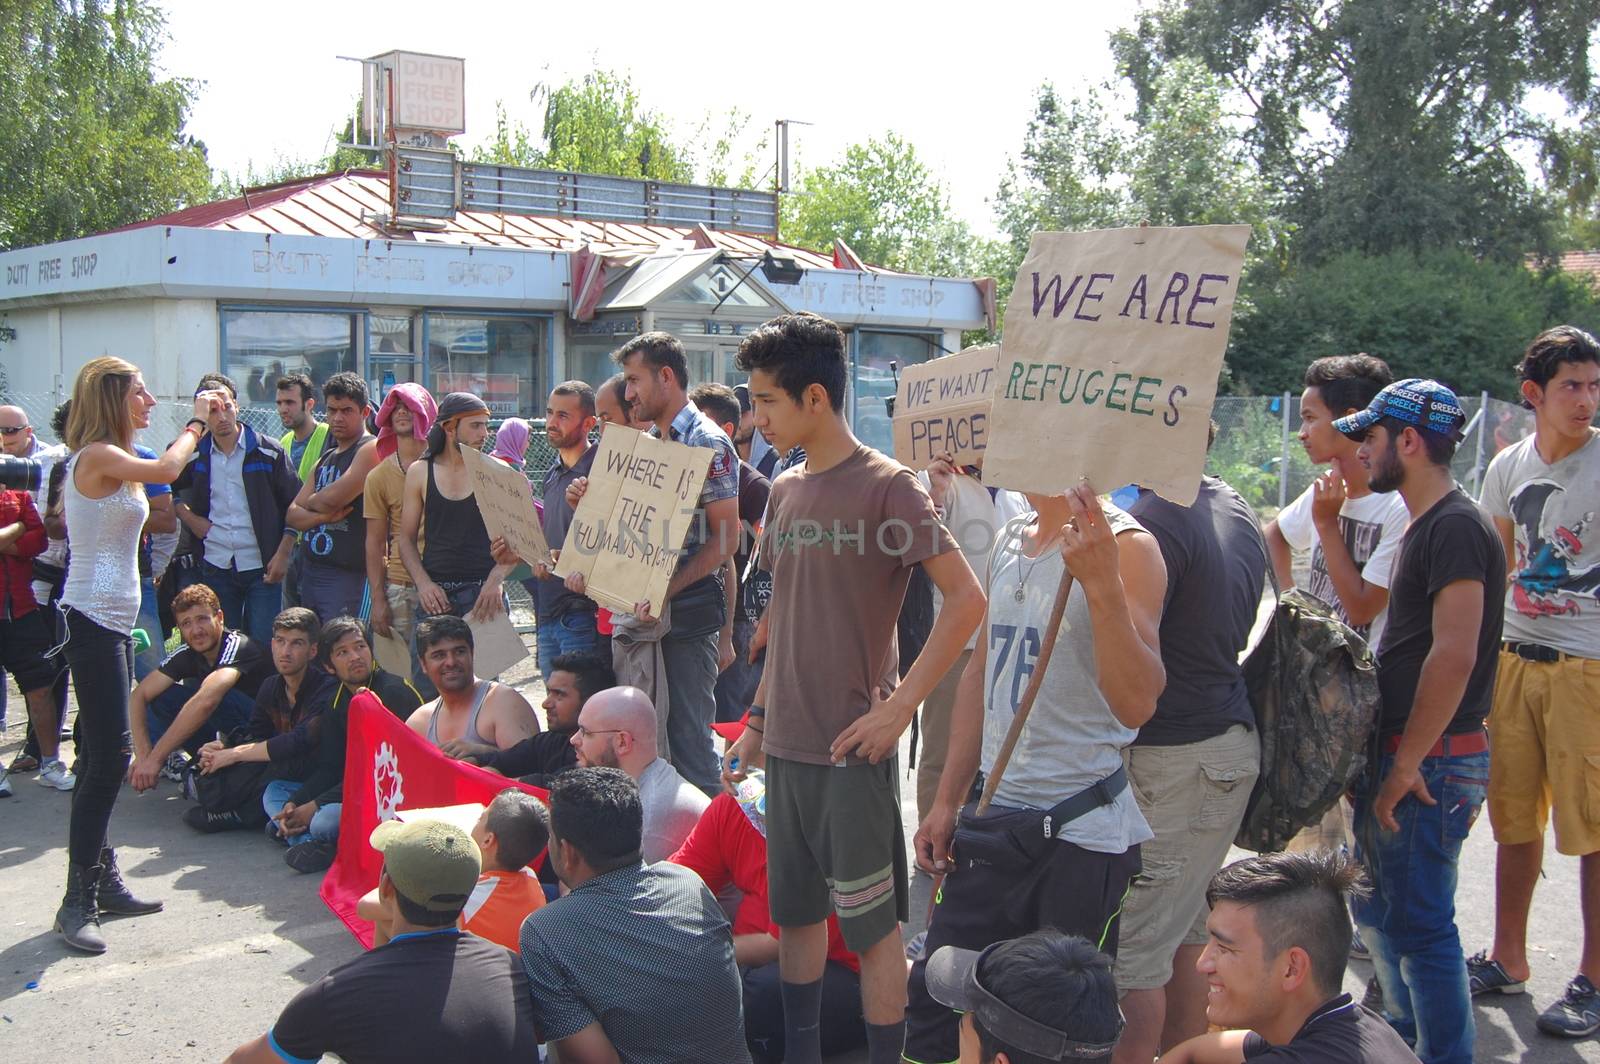 SERBIA, Horgo�: Migrants gather holding signs and flags in Horgo�, Serbia on September 17, 2015. Recently the migrants have clashed with police forcing the police to use tear gas and water cannons to hold the refugees at bay. The migrants demanded that the razor-wire fence be opened, which would allow them to continue their journey though Europe. 